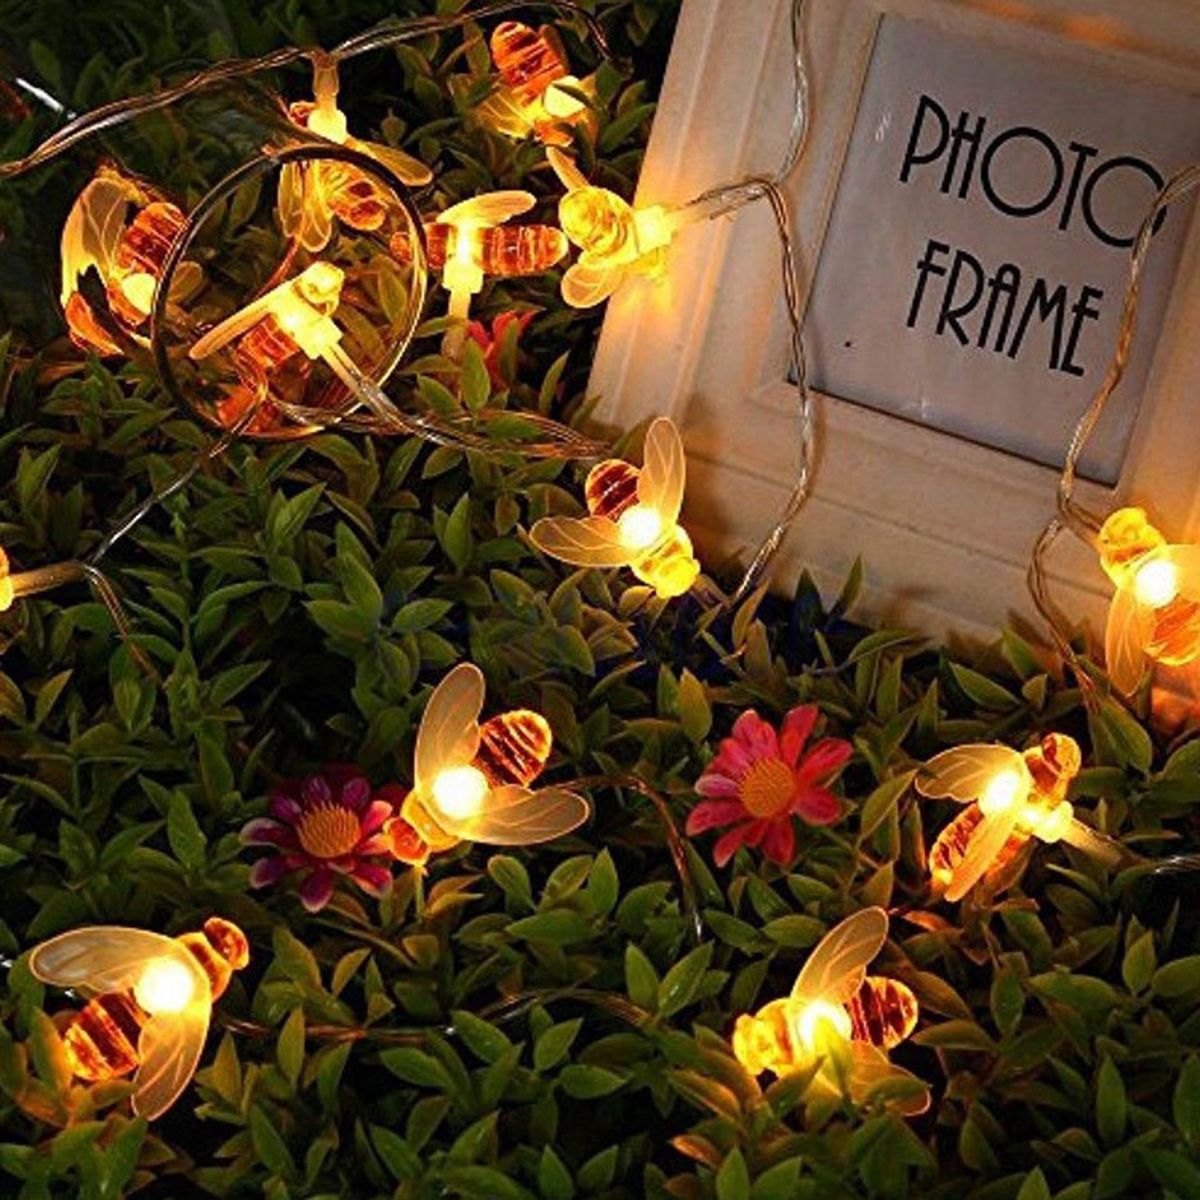 485m-635m-785m-Solar-Powered-LED-String-Light-Waterproof-Bee-Outdoor-Garden-Lamp-for-Gift-Decor-Part-1647998